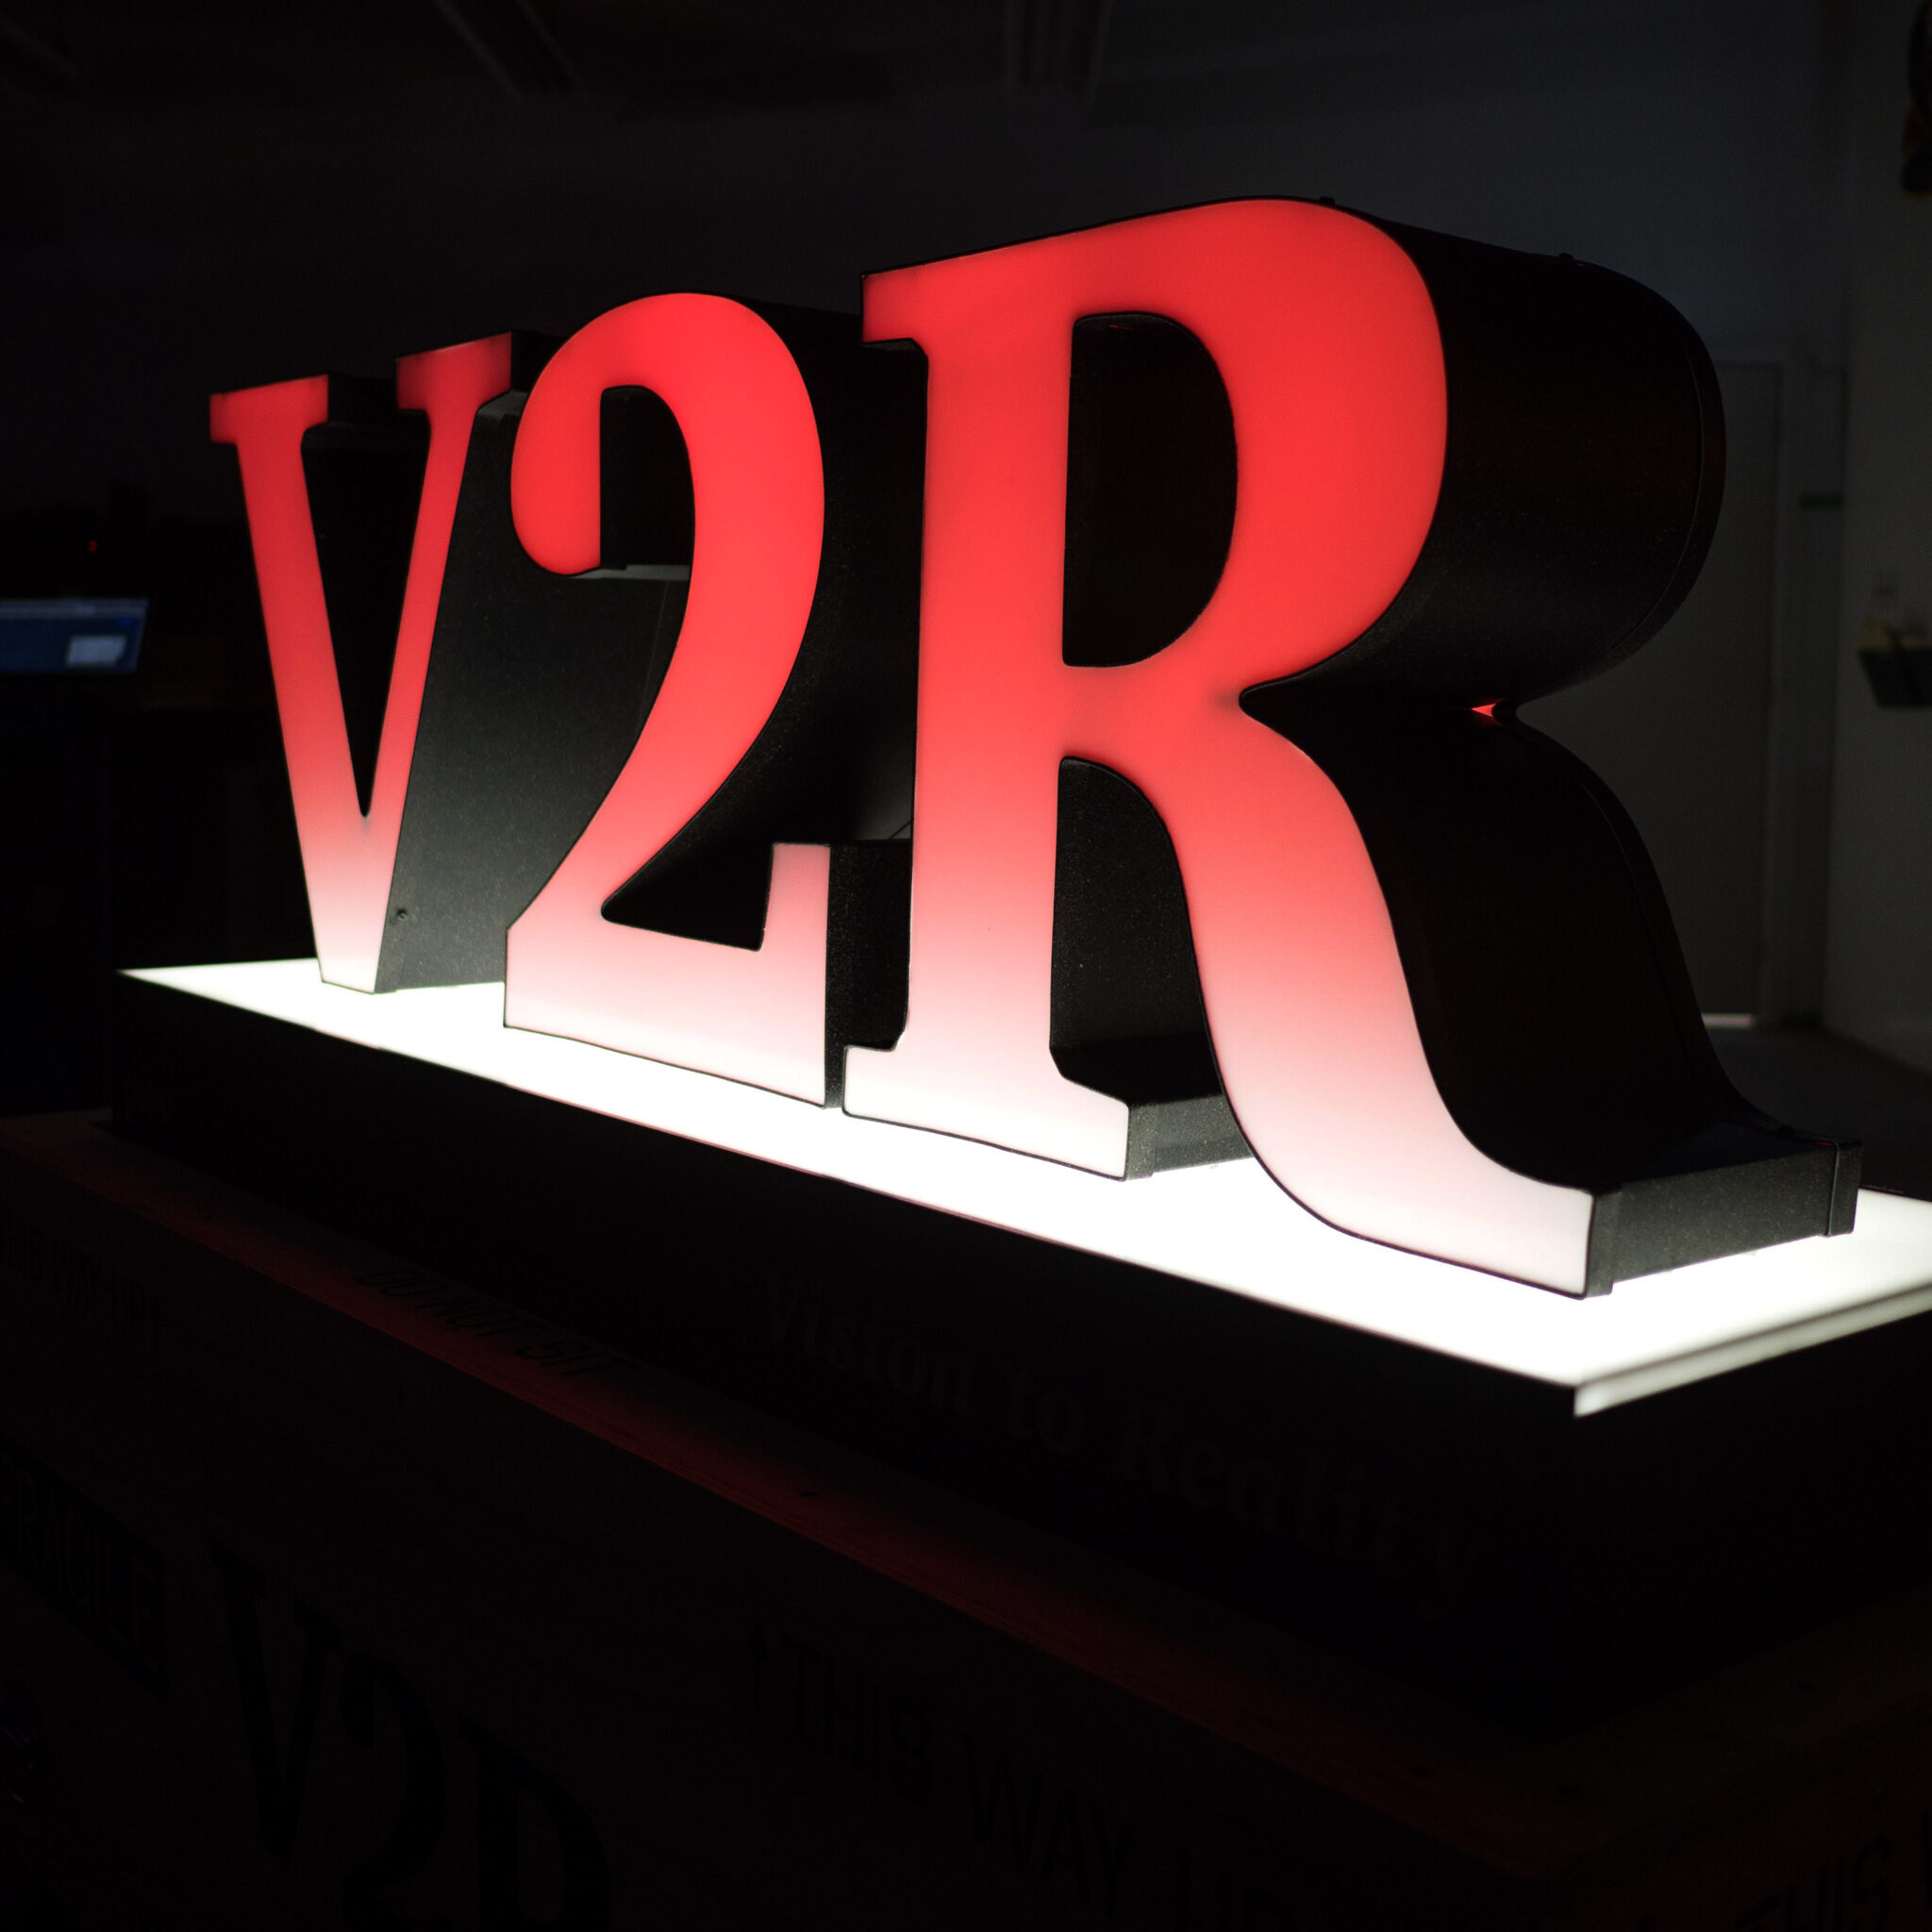 The red 3D channel letters for V2R.